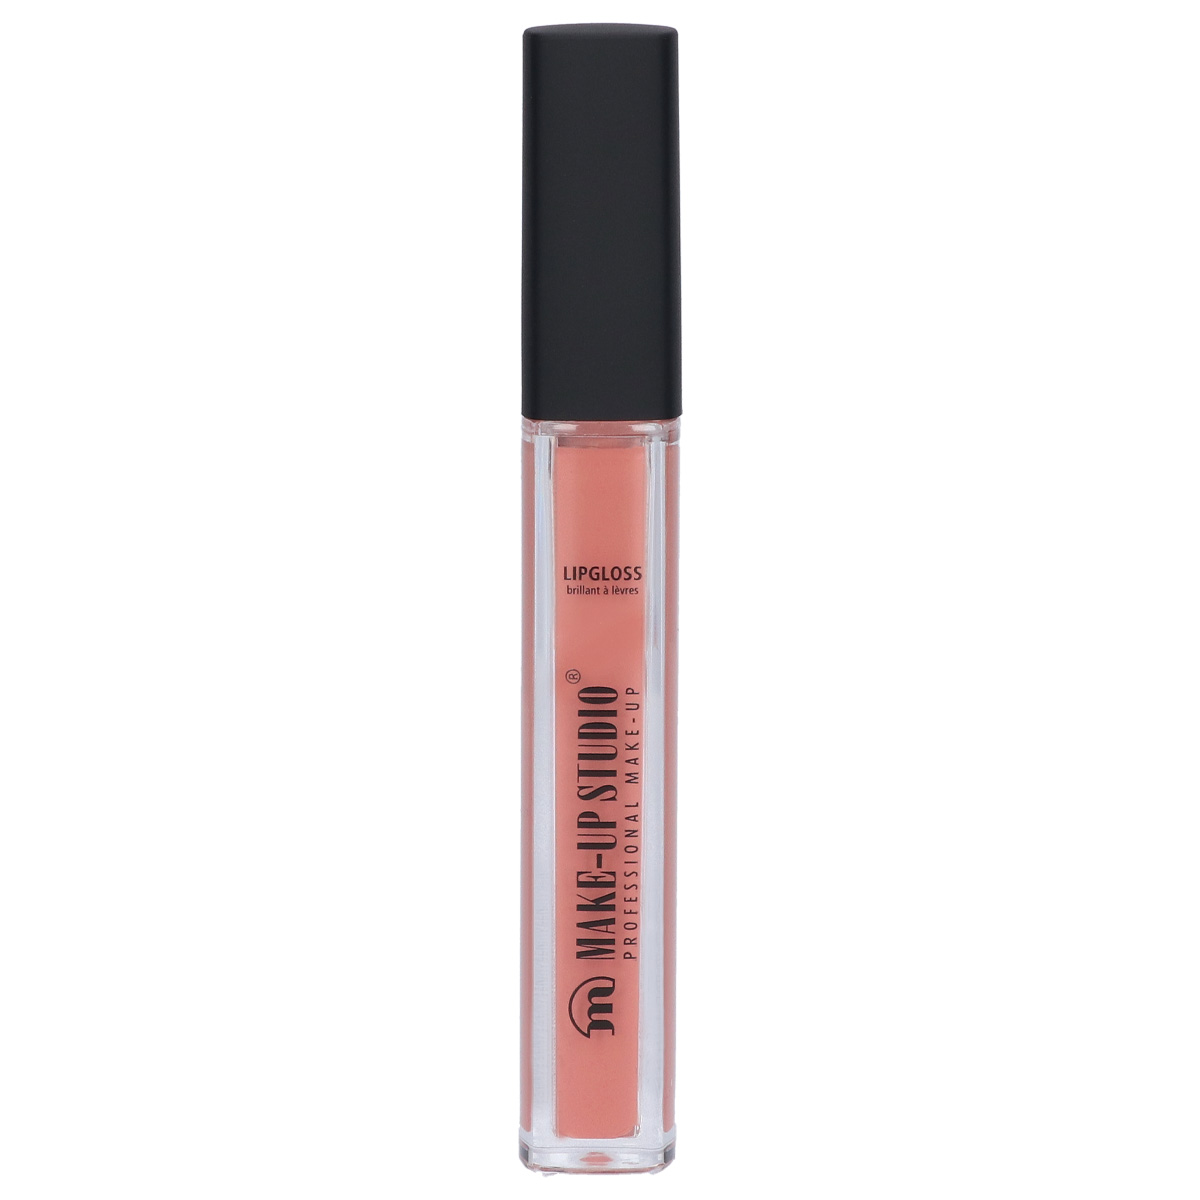 Paint Gloss Lipgloss - Sophisticated Nude